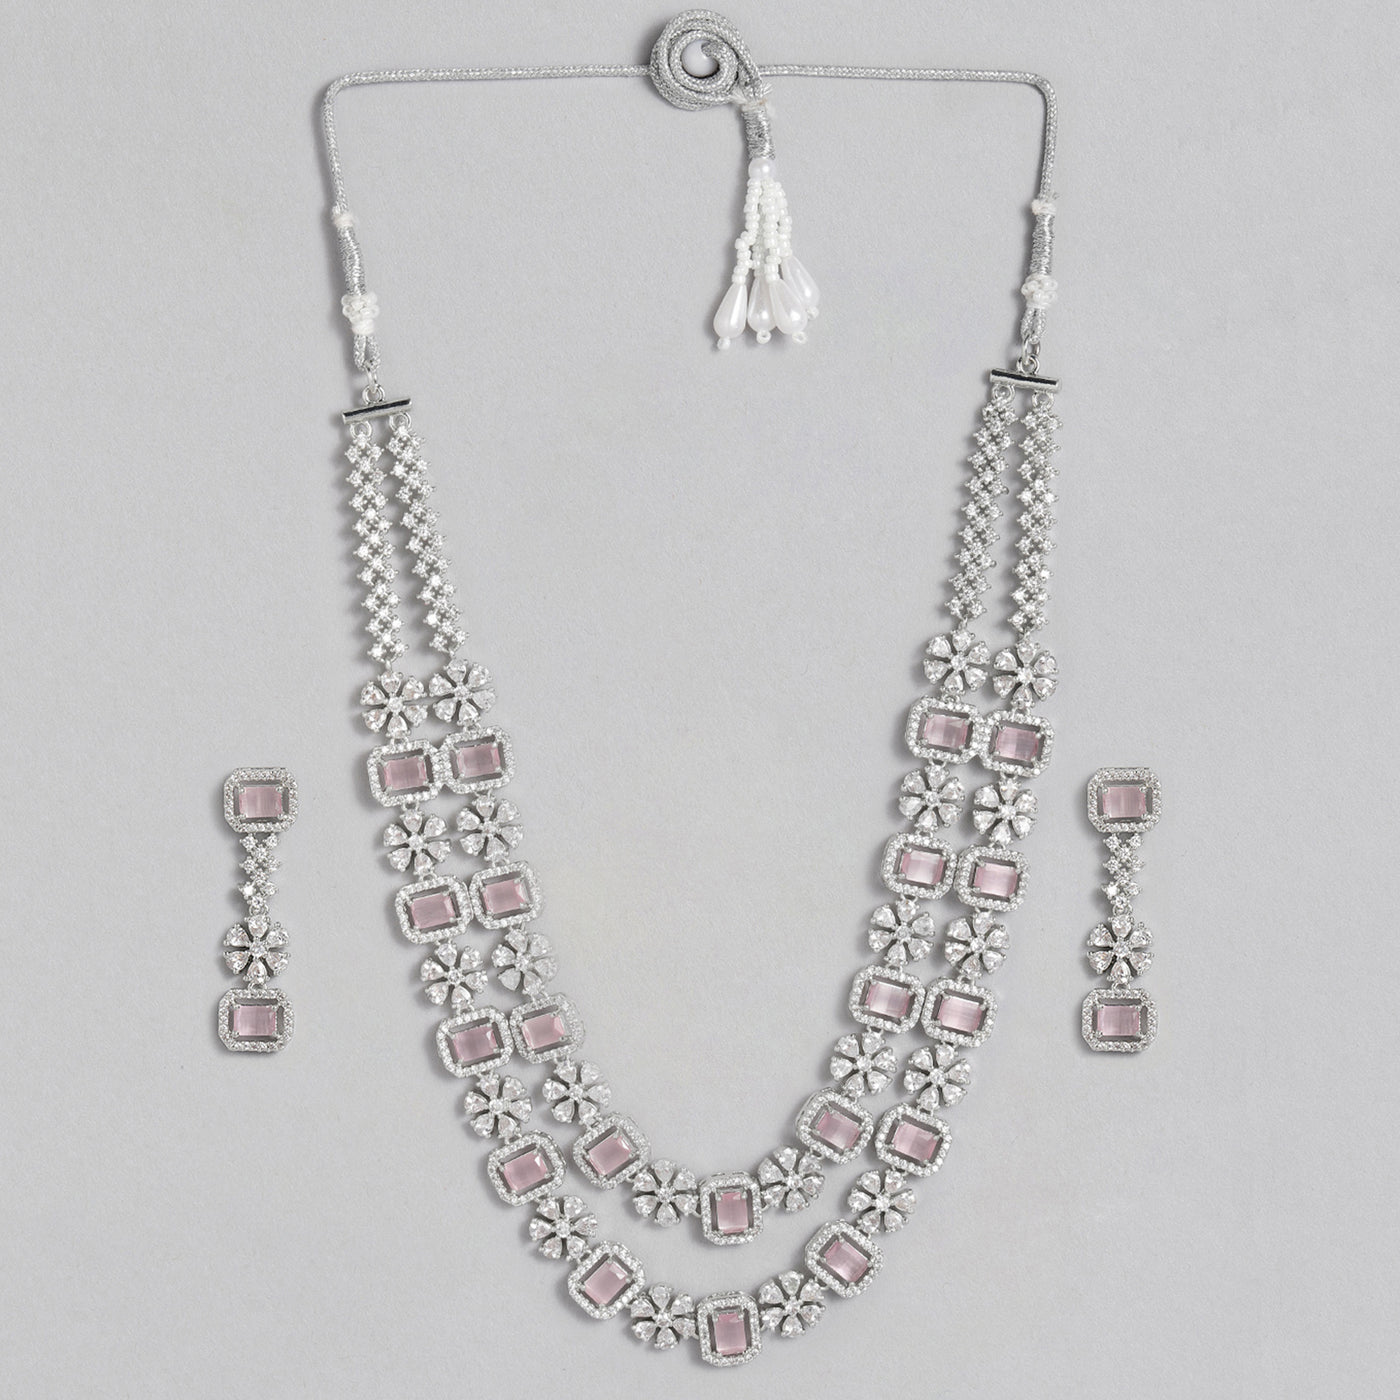 Estele Rhodium Plated CZ Fascinating Double Layered Necklace Set with Mint Pink and White Crystals for Women